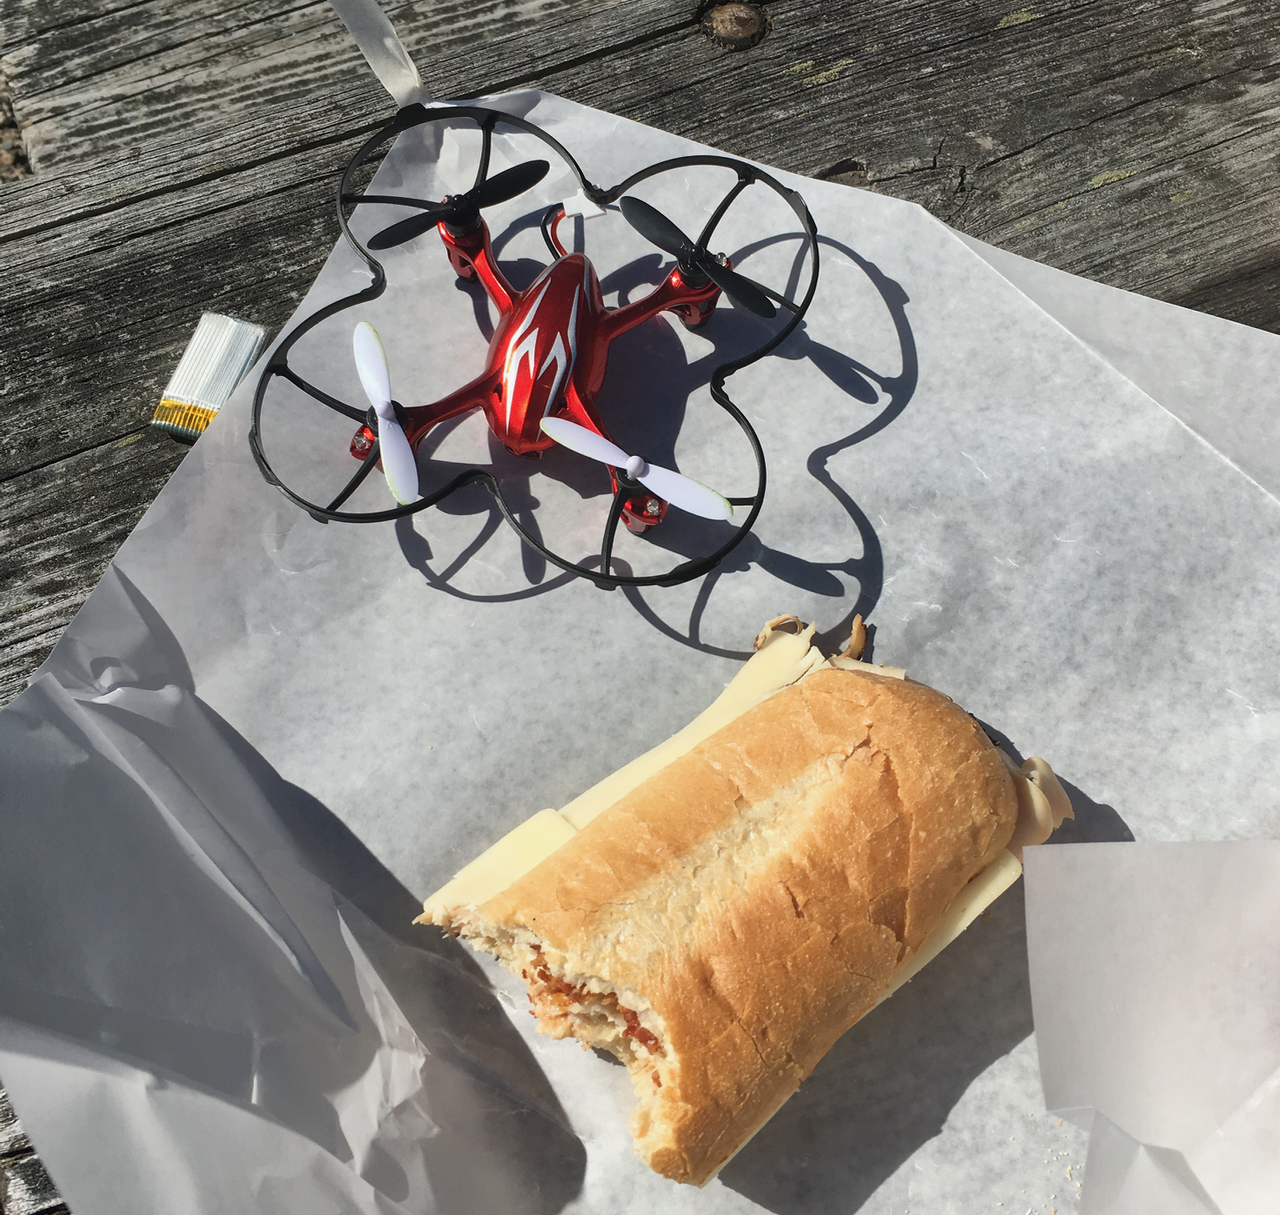 Hubsan X4 H107c with sandwich for scale